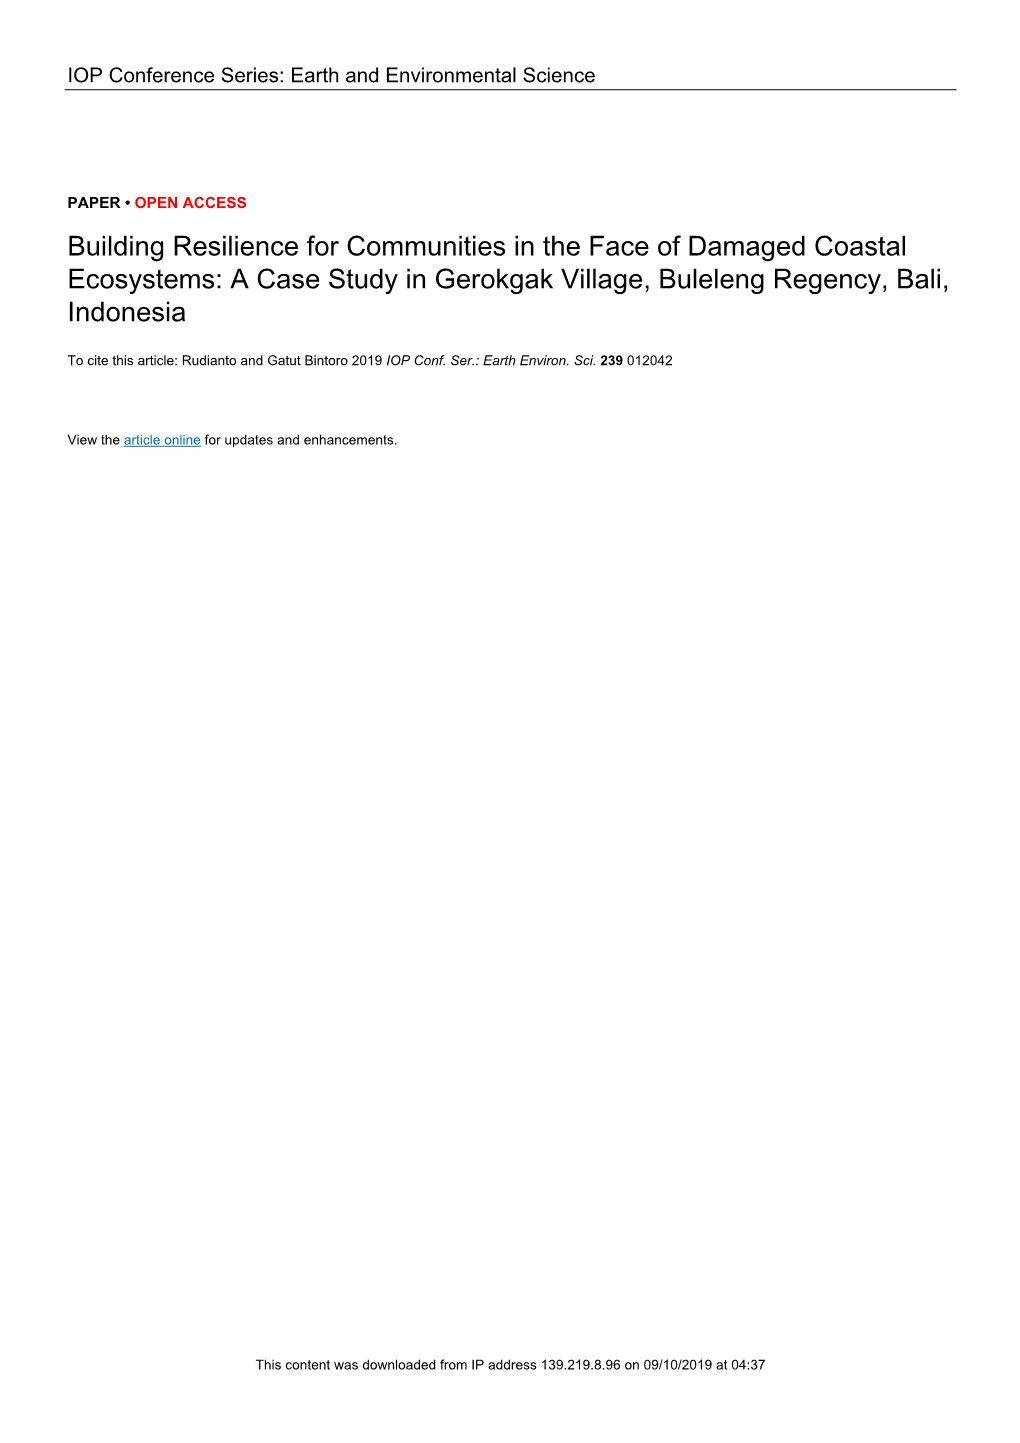 Building Resilience for Communities in the Face of Damaged Coastal Ecosystems: a Case Study in Gerokgak Village, Buleleng Regency, Bali, Indonesia